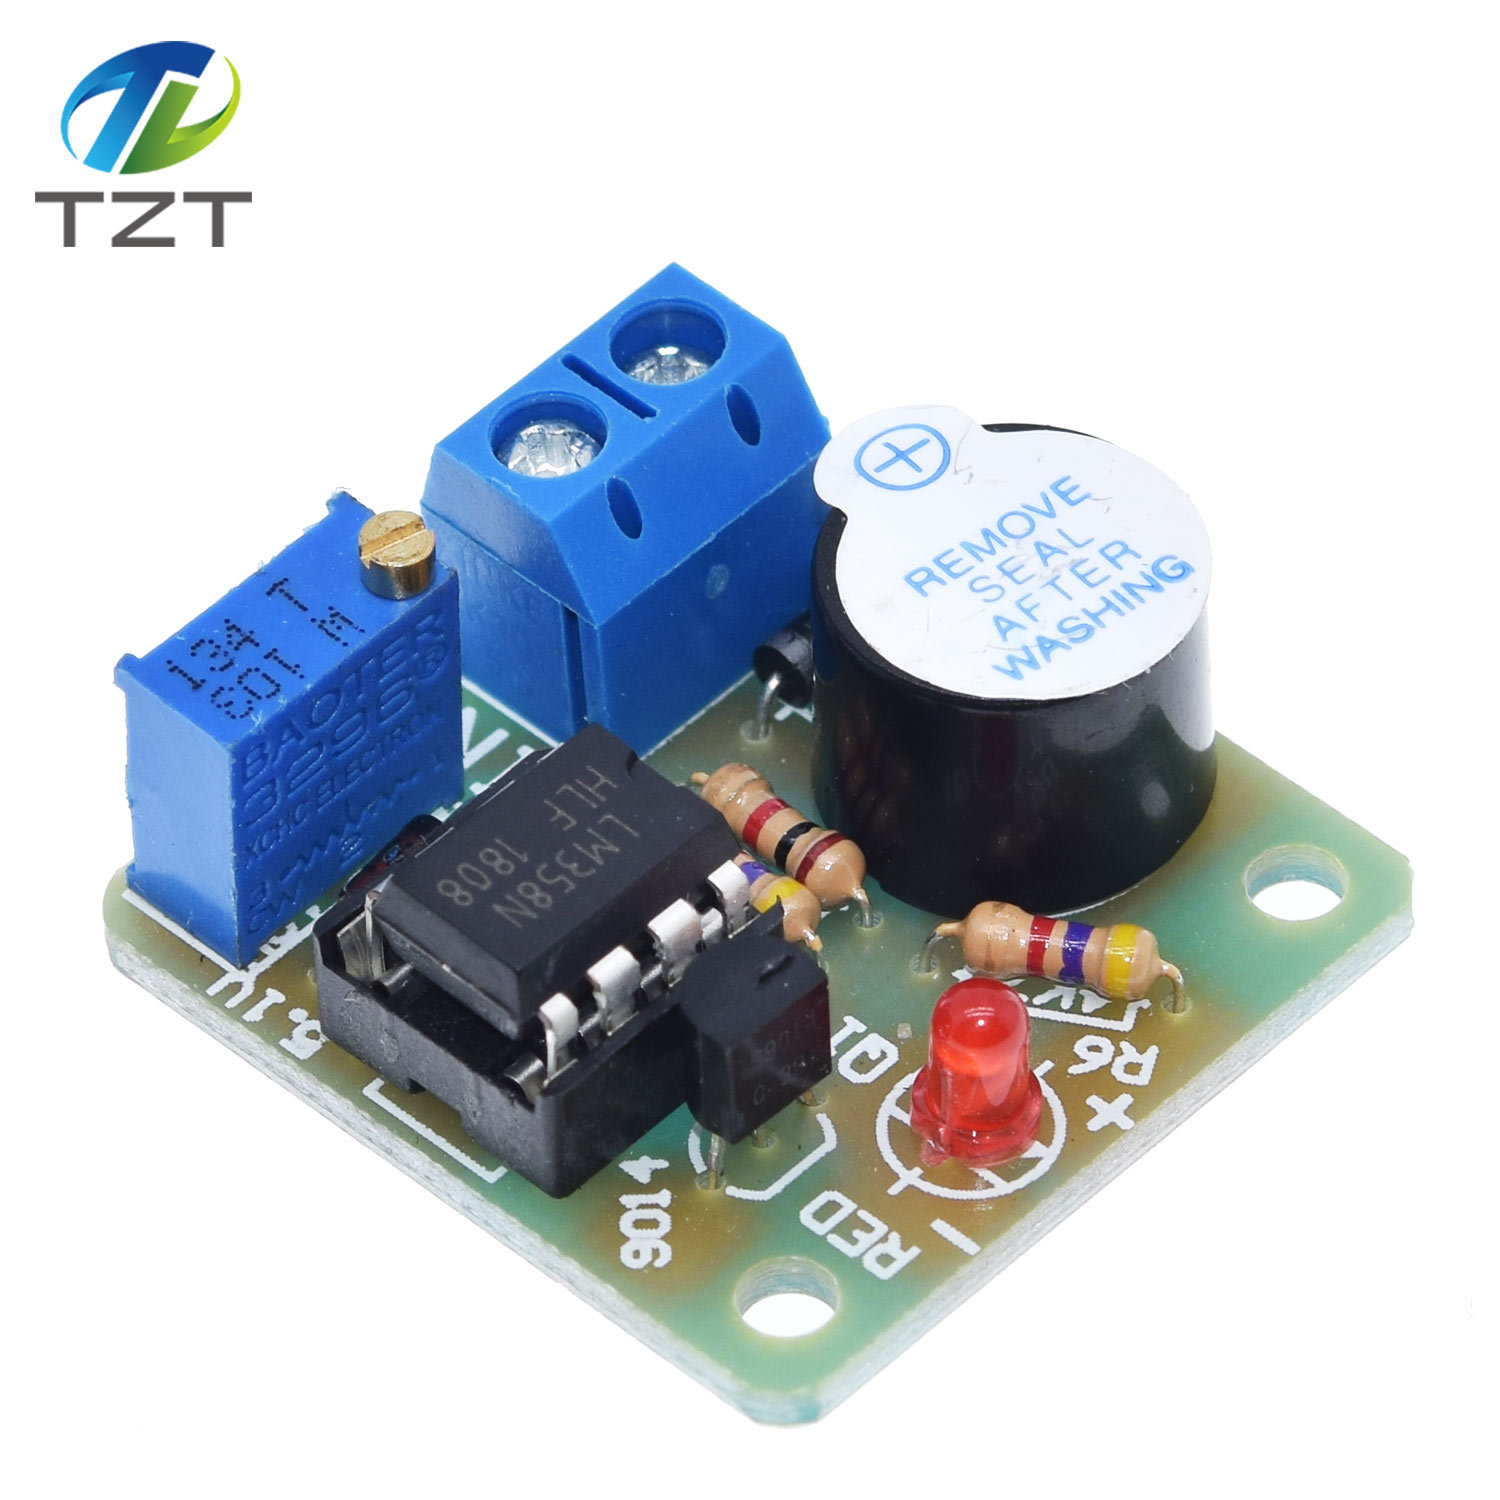 TZT 12V LM358 Accumulator Sound Light Alarm Board Buzzer Prevent Over Discharge Controller Module Without Overvoltage Protection